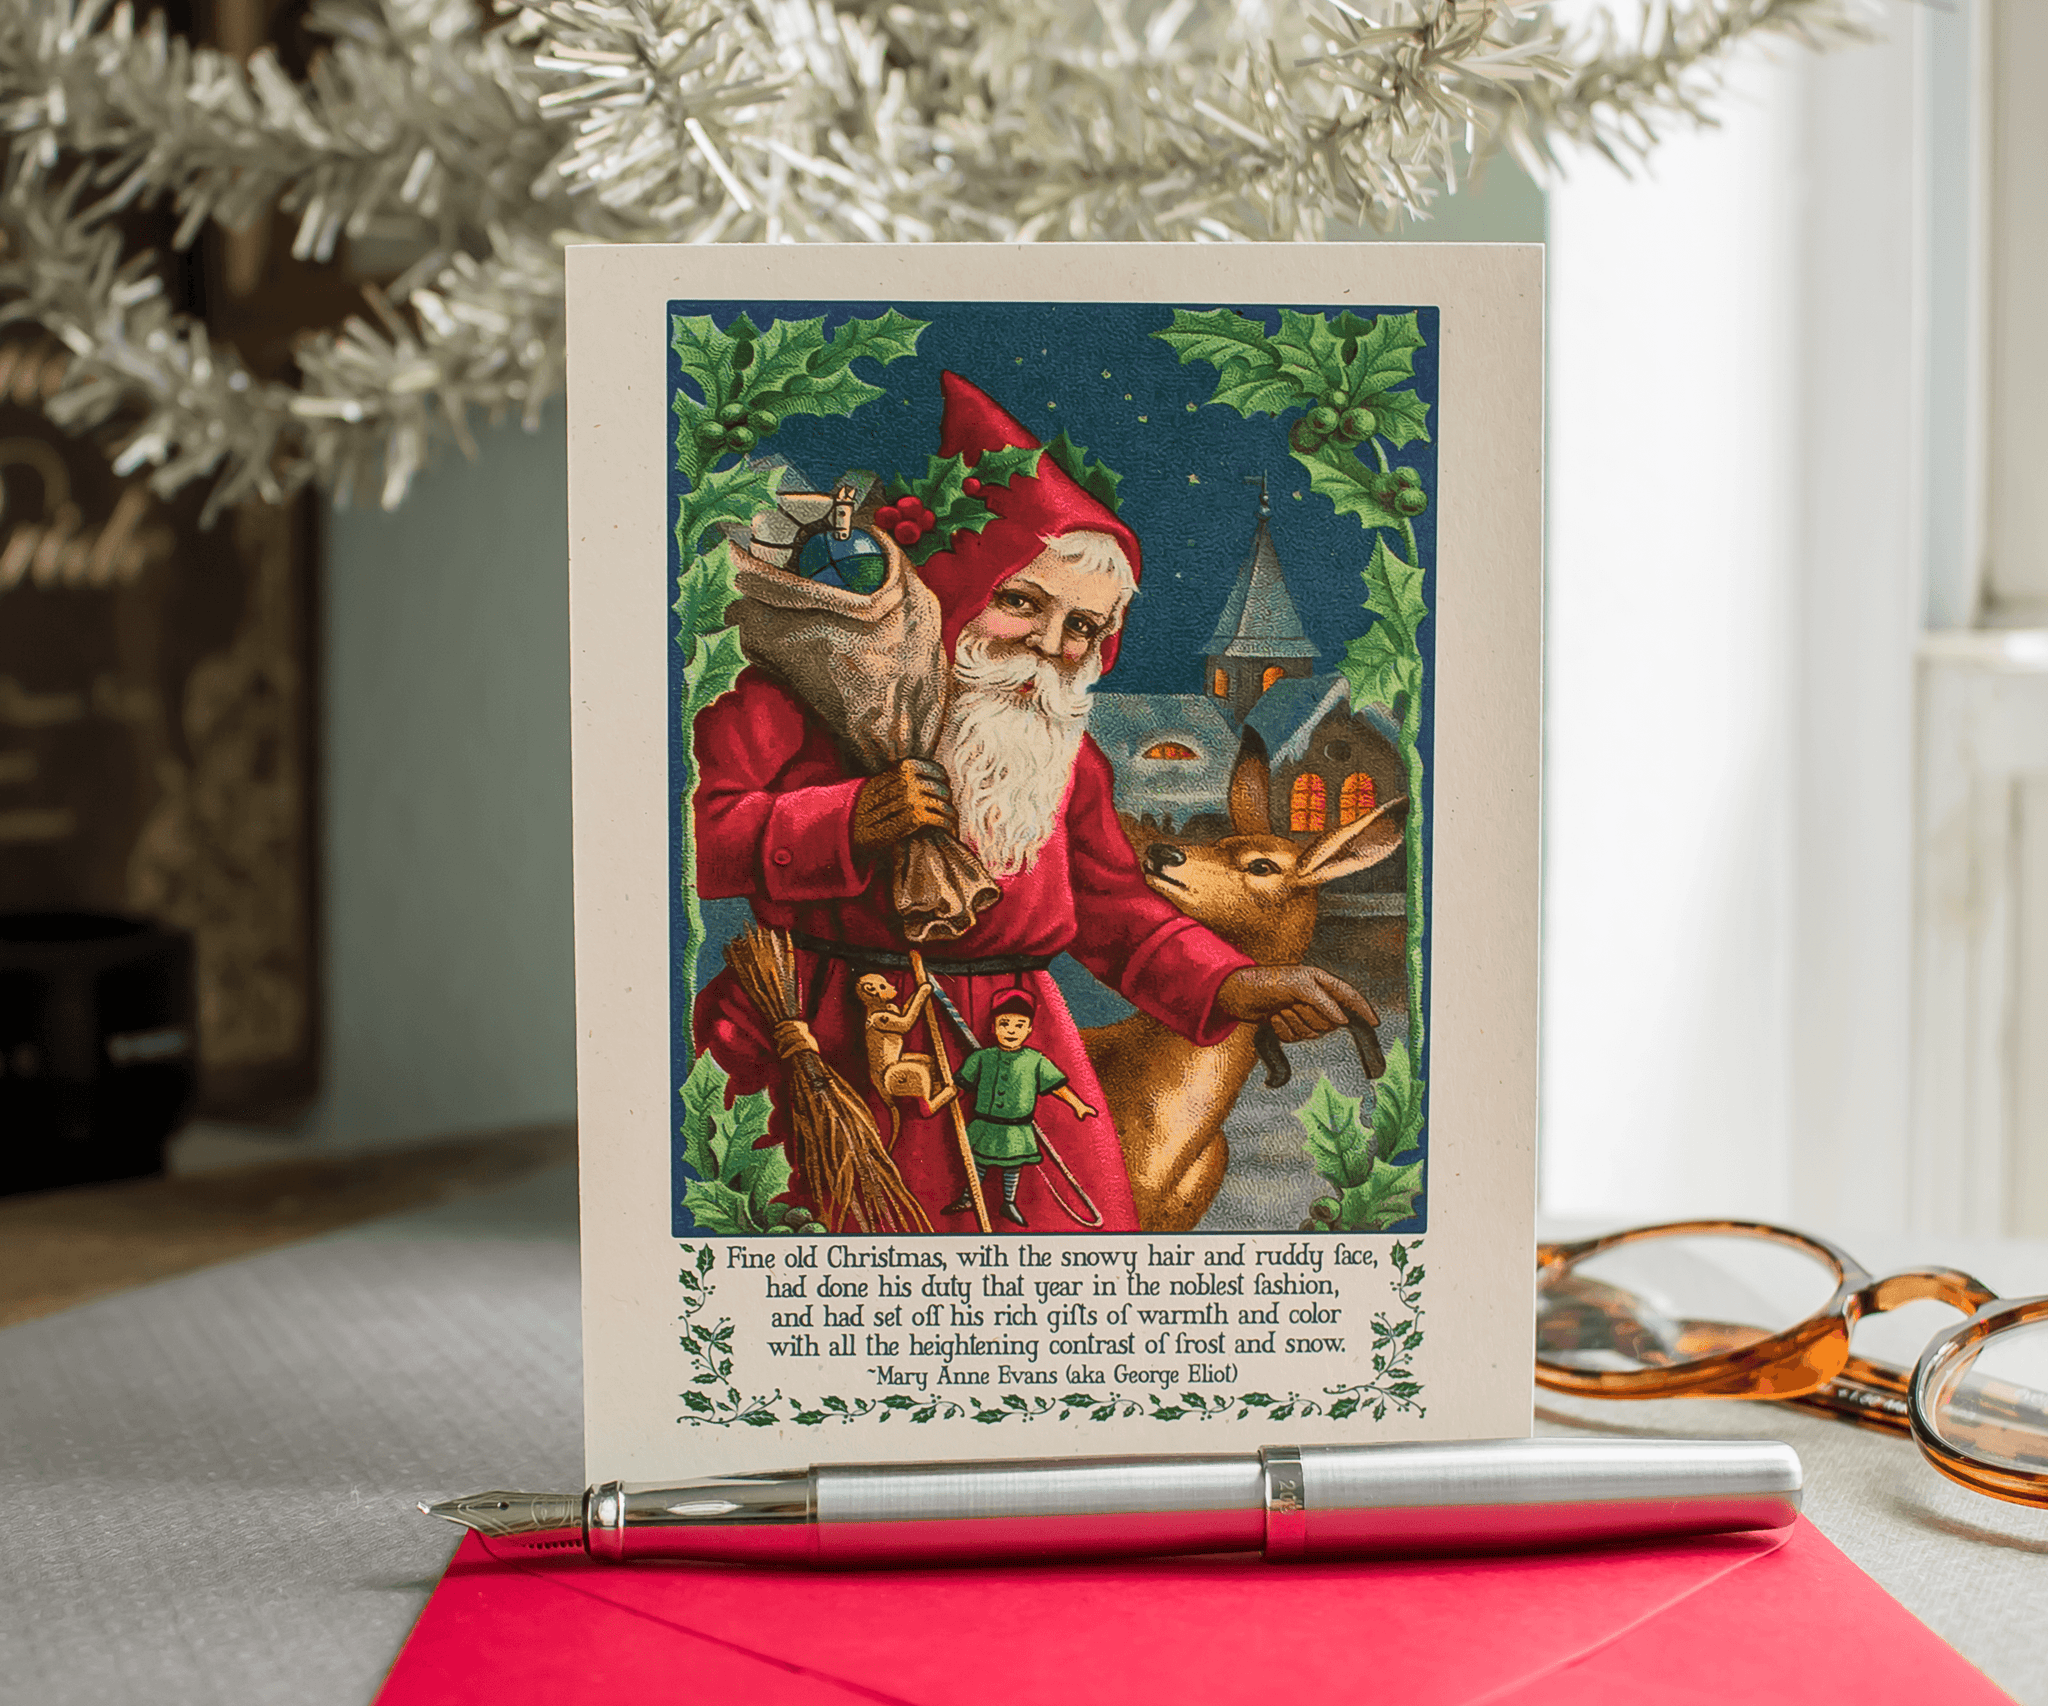 Merry Christmas Old Fashioned Santa Claus Holiday Greeting Cards